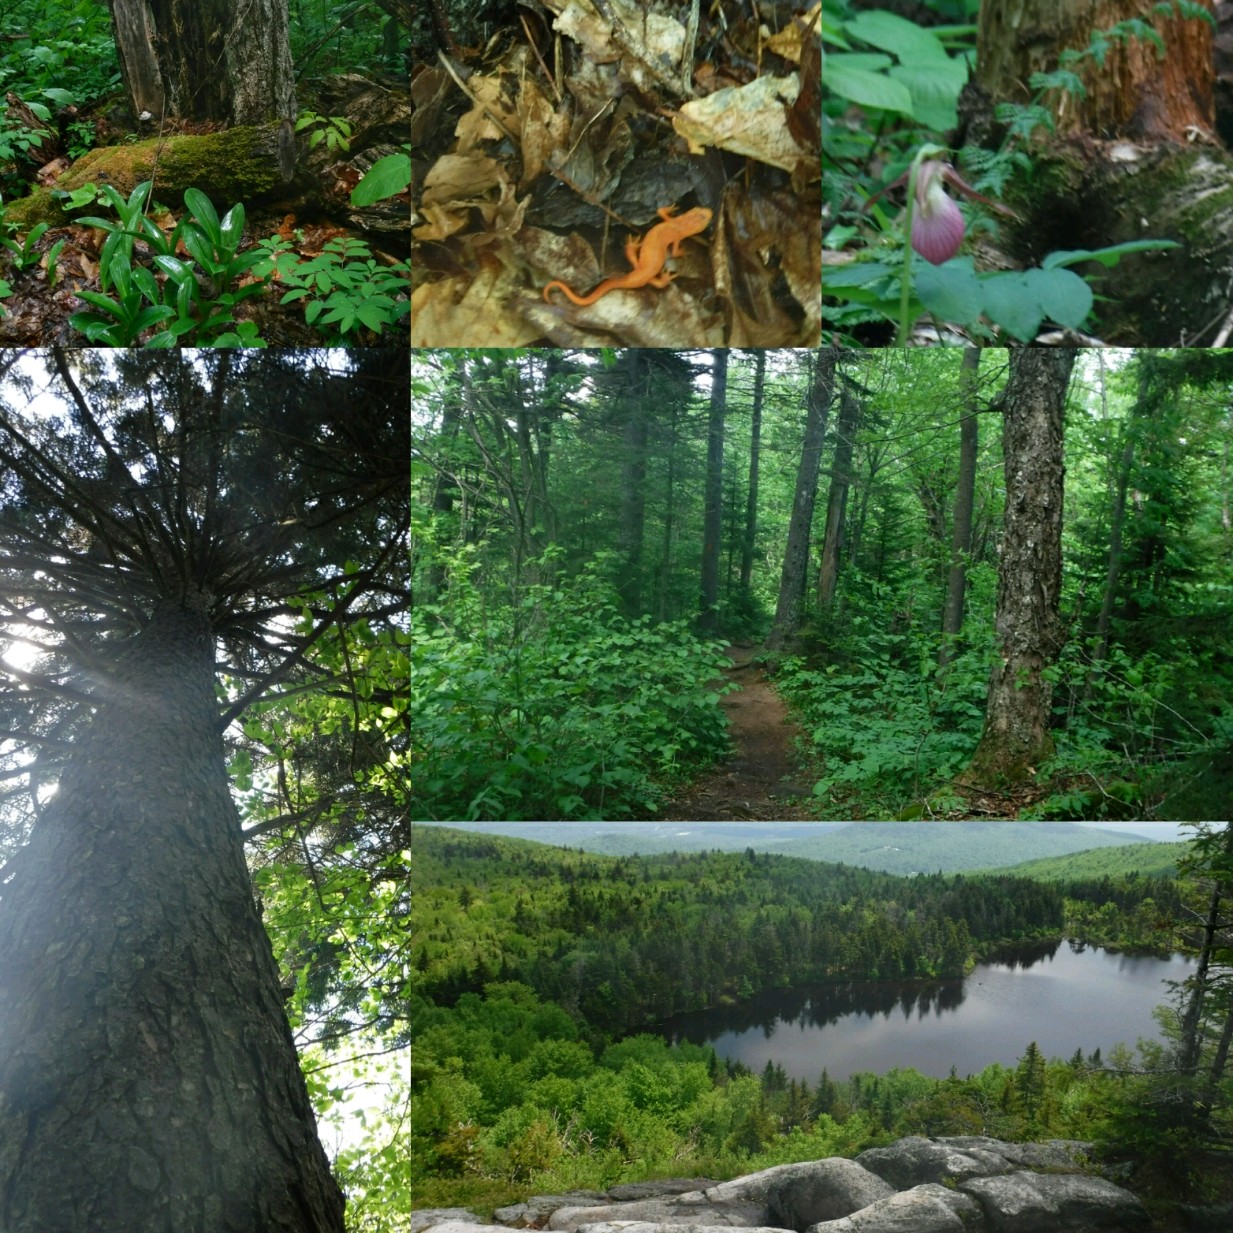 The Environmental Hour explores Mount Sunapee’s rare old forest